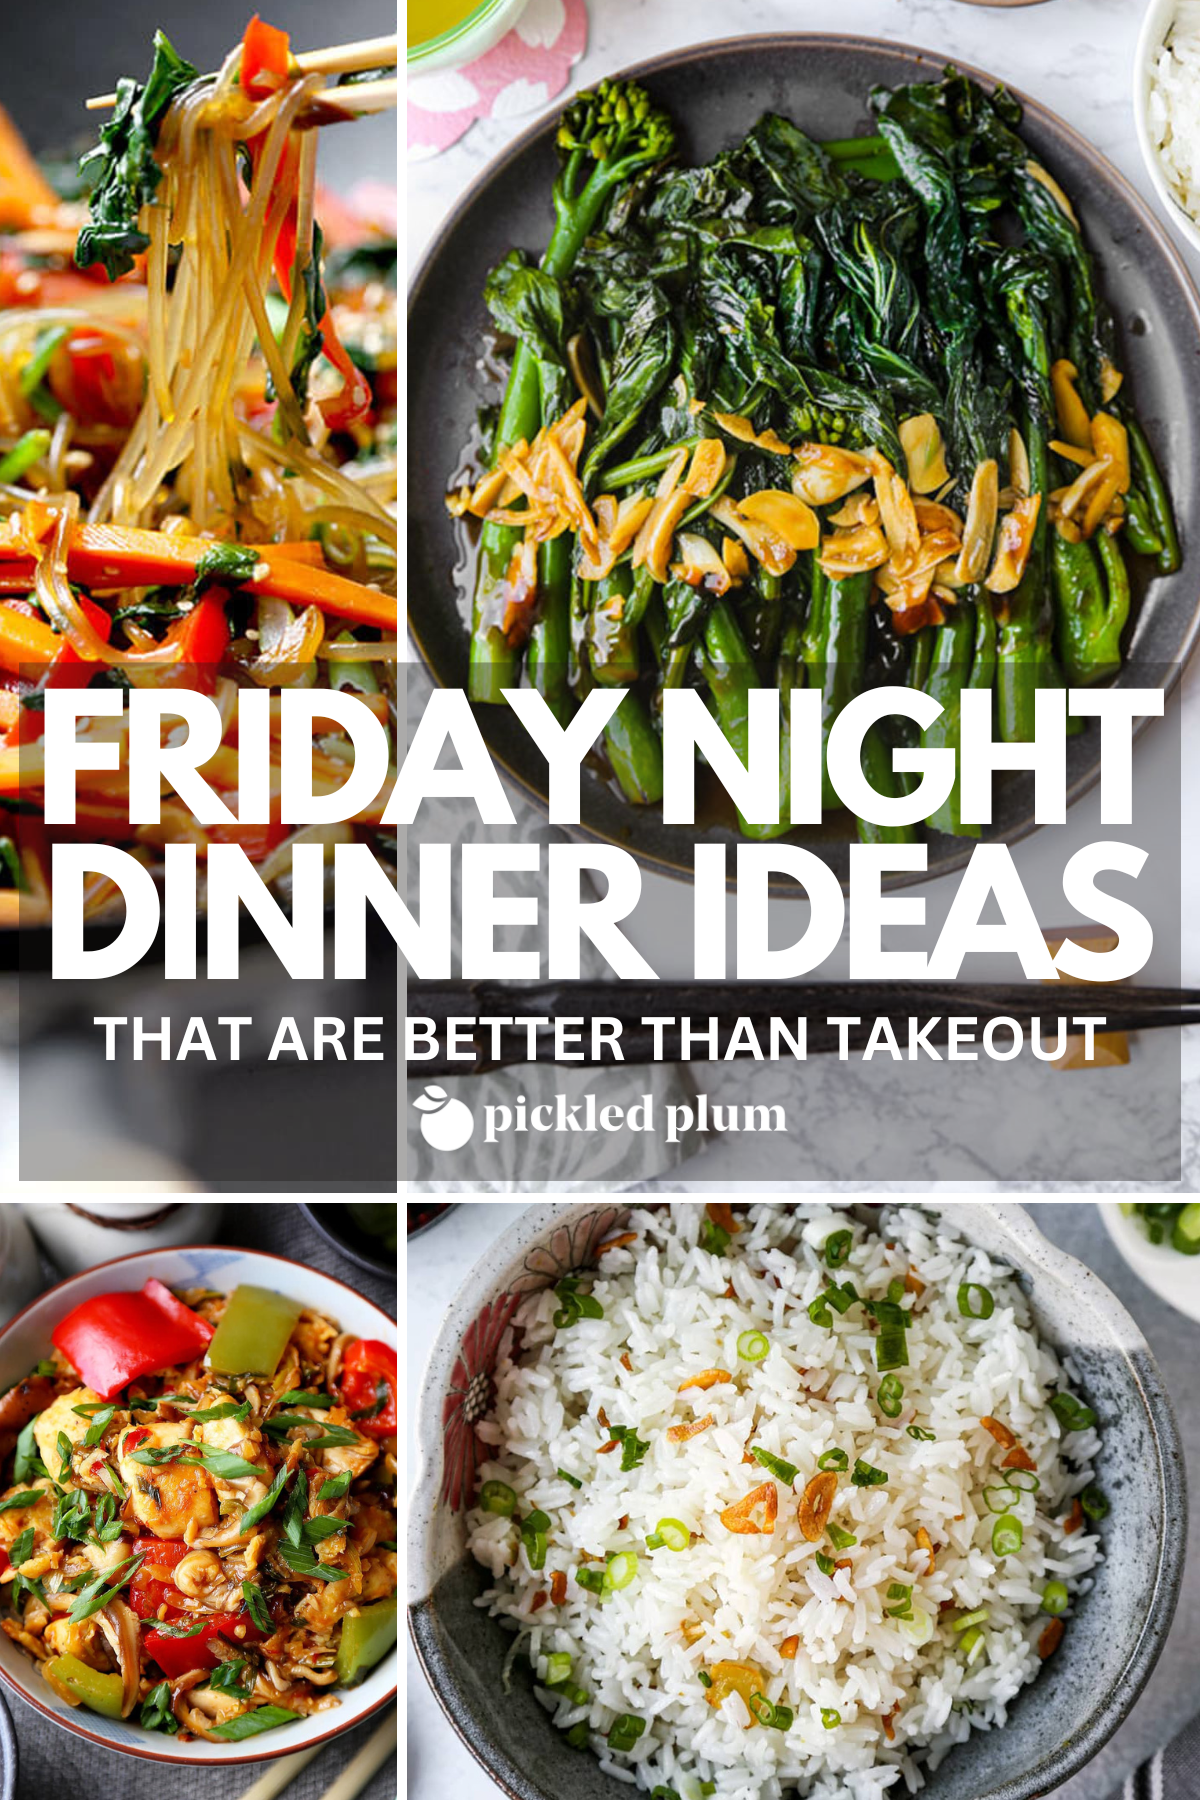 Friday Night Dinner Ideas That Are Better Than Takeout